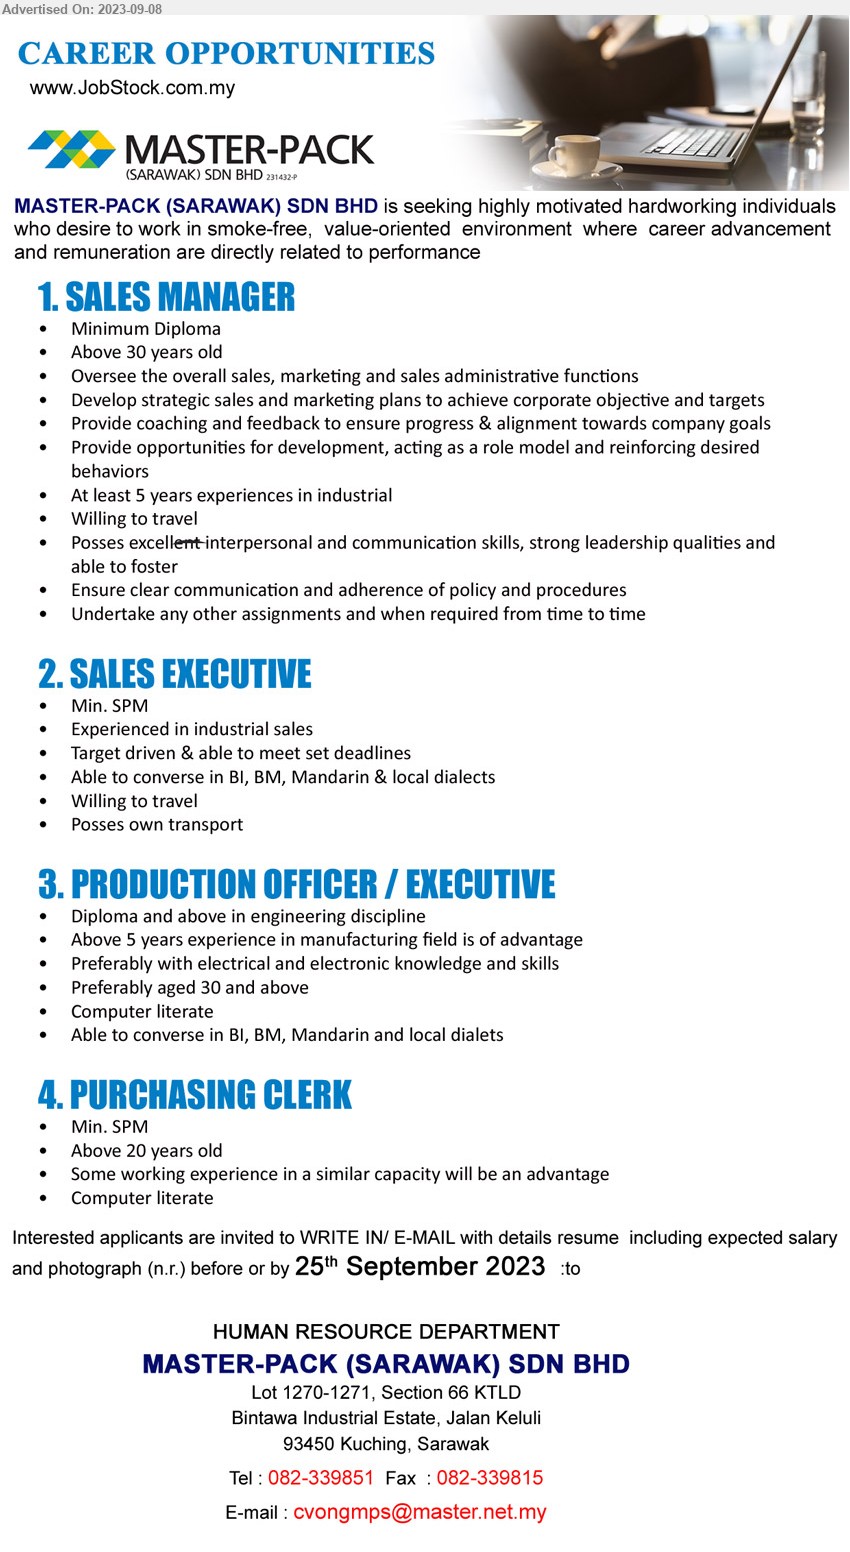 MASTER-PACK (SARAWAK) SDN BHD - 1. SALES MANAGER (Kuching), Diploma, At least 5 years experiences in industrial ,...
2. SALES EXECUTIVE  (Kuching), SPM, Experienced in industrial sales,...
3. PRODUCTION OFFICER / EXECUTIVE (Kuching), Diploma and above in engineering discipline, Above 5 years experience in manufacturing field is of advantage,...
4. PURCHASING CLERK (Kuching), SPM, Some working experience in a similar capacity will be an advantage,...
Call 082-339851   / Email resume to ...